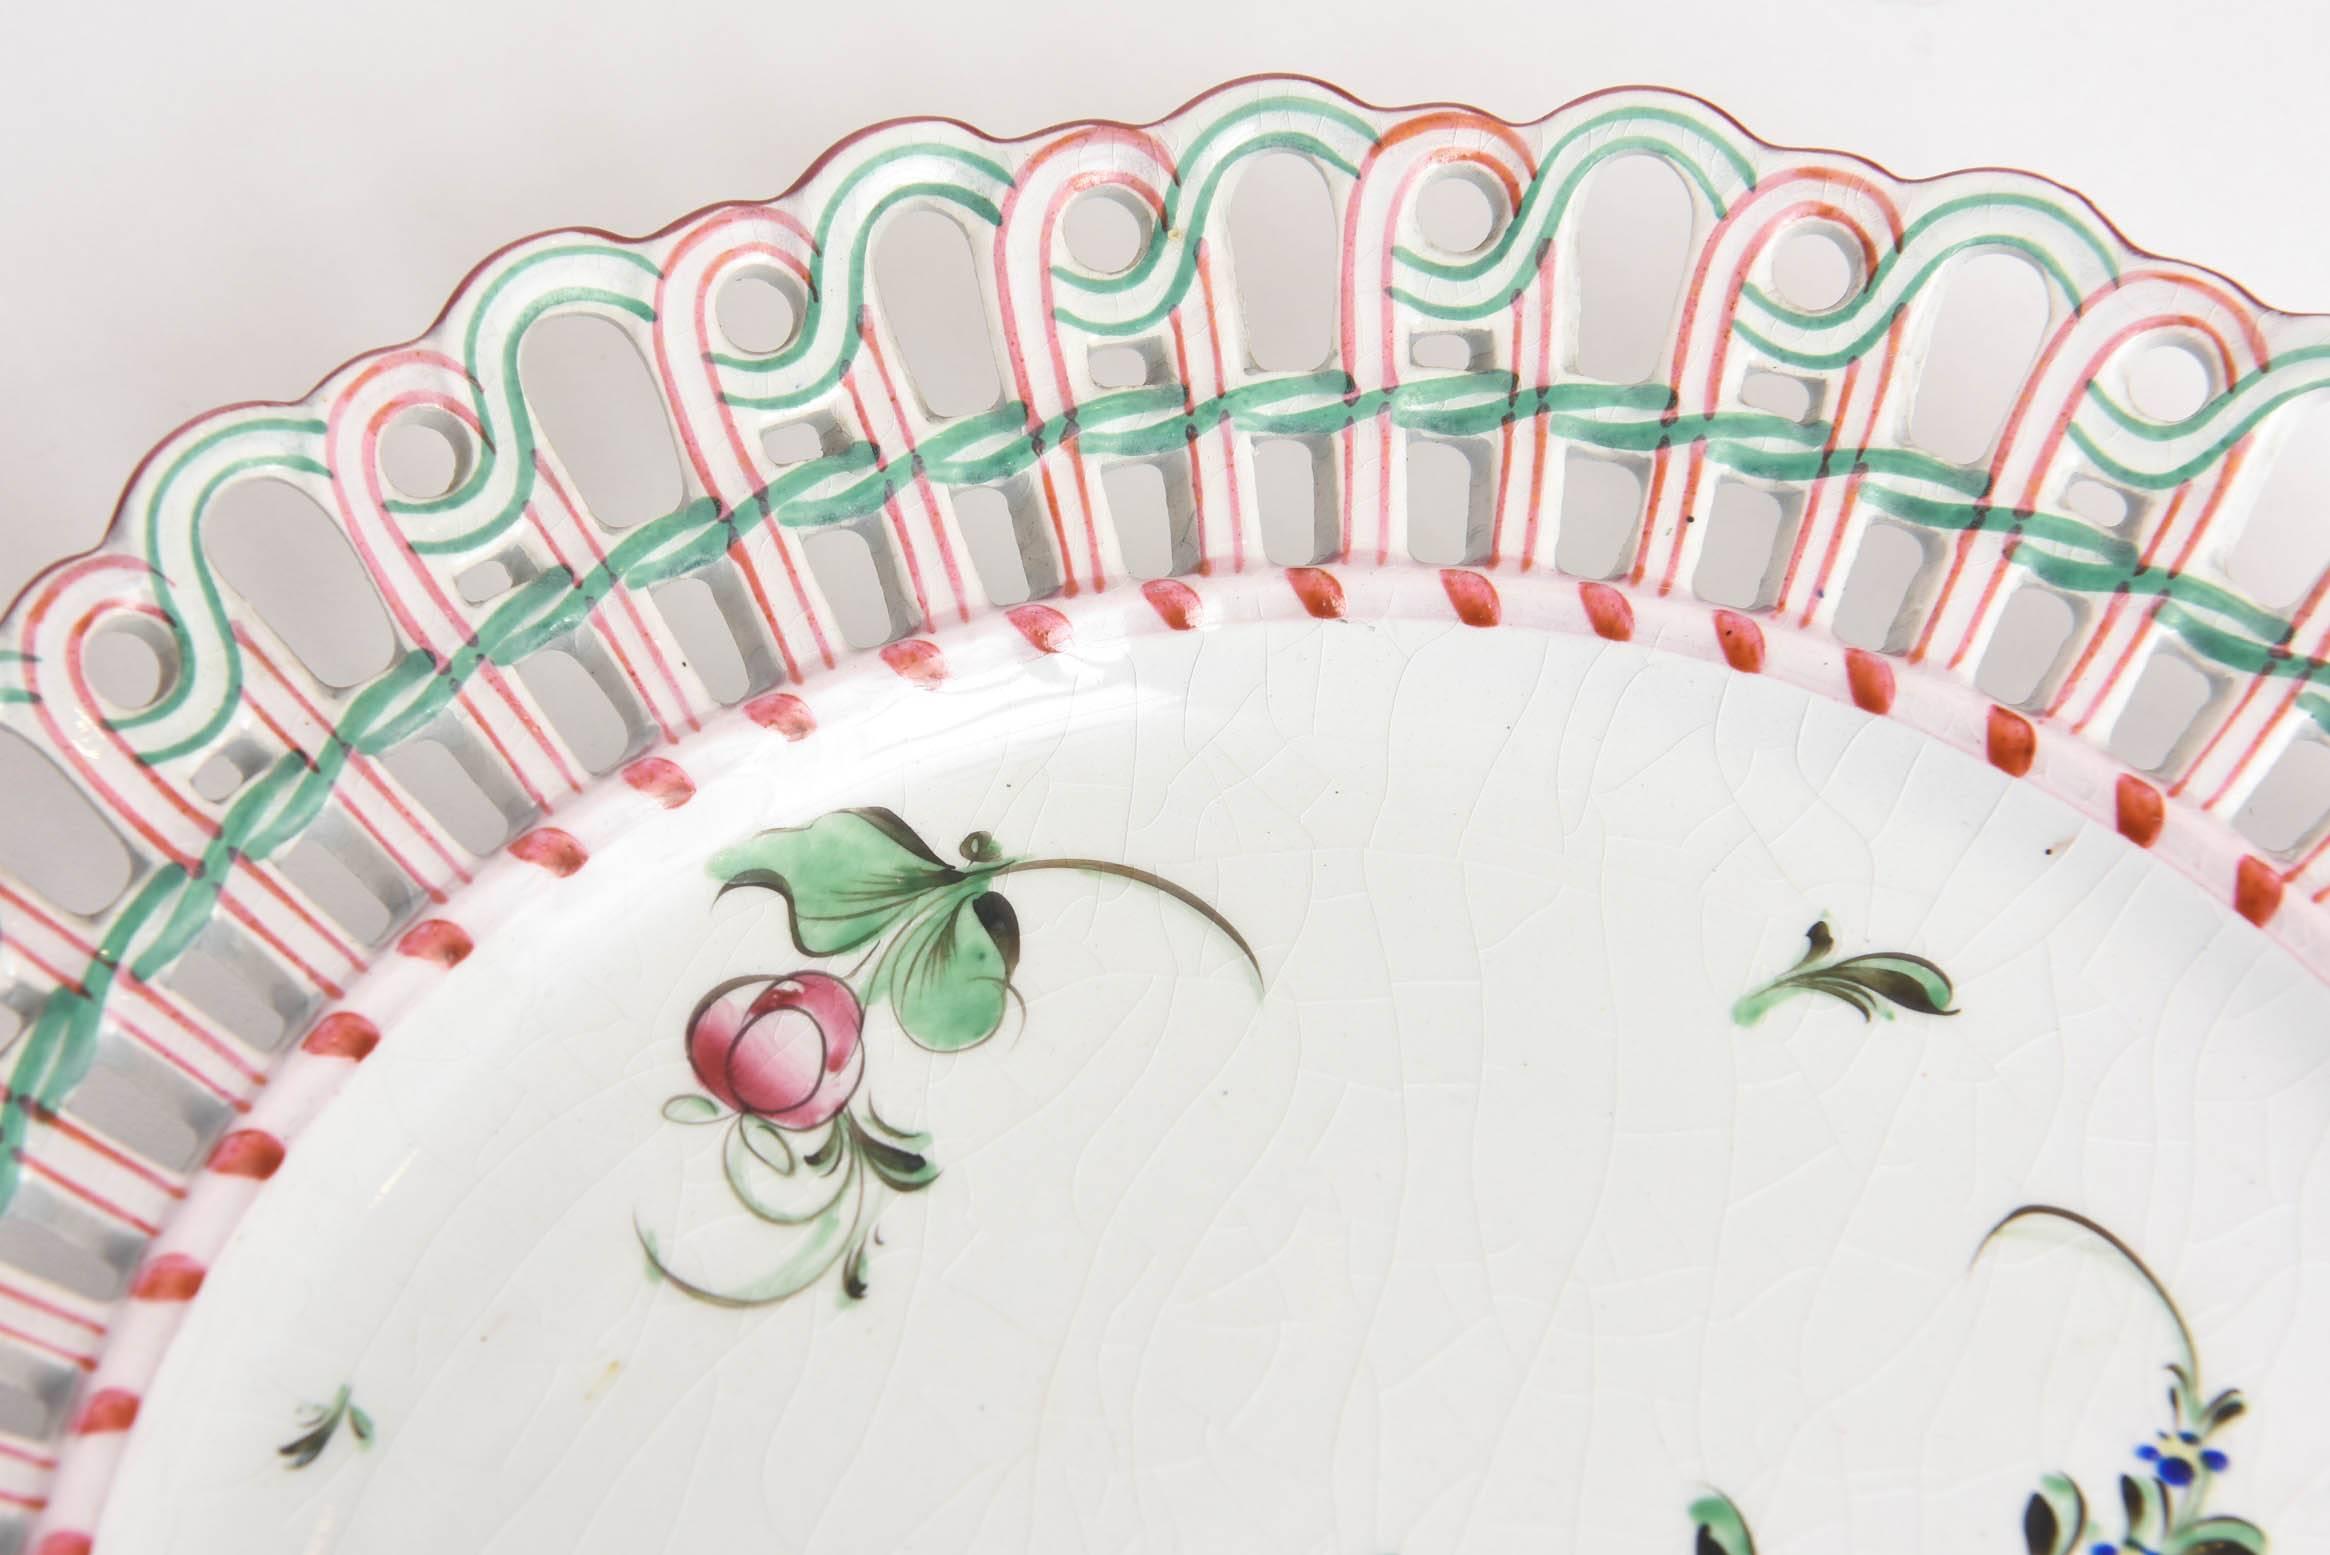 Enamel 12 Luneville, France Reticulated Hand-Painted Plates, Rare Pink Green Collars